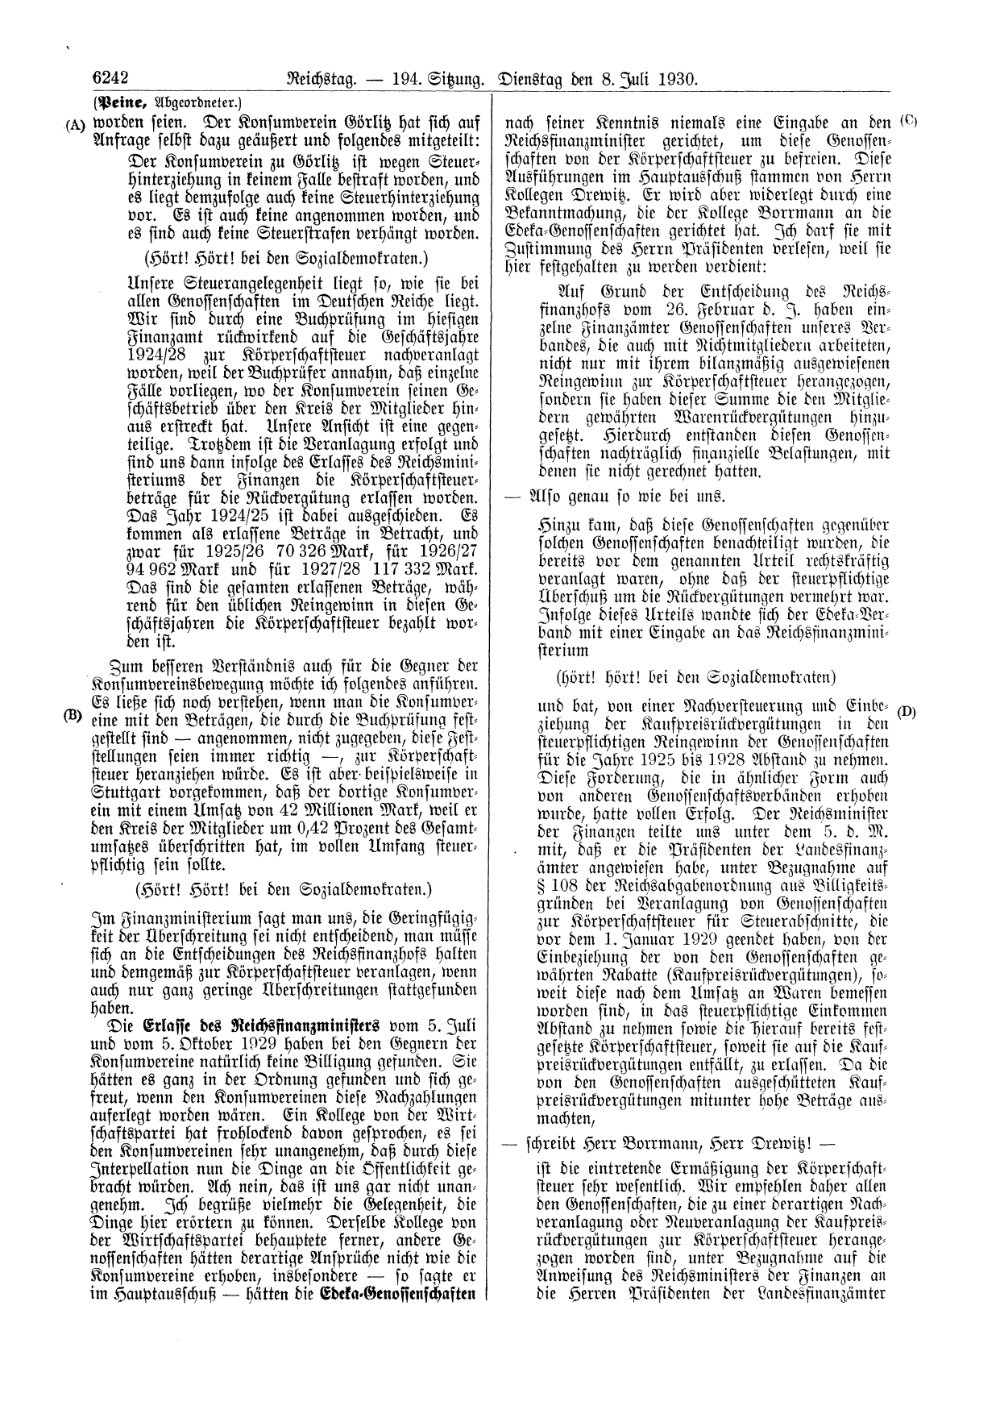 Scan of page 6242